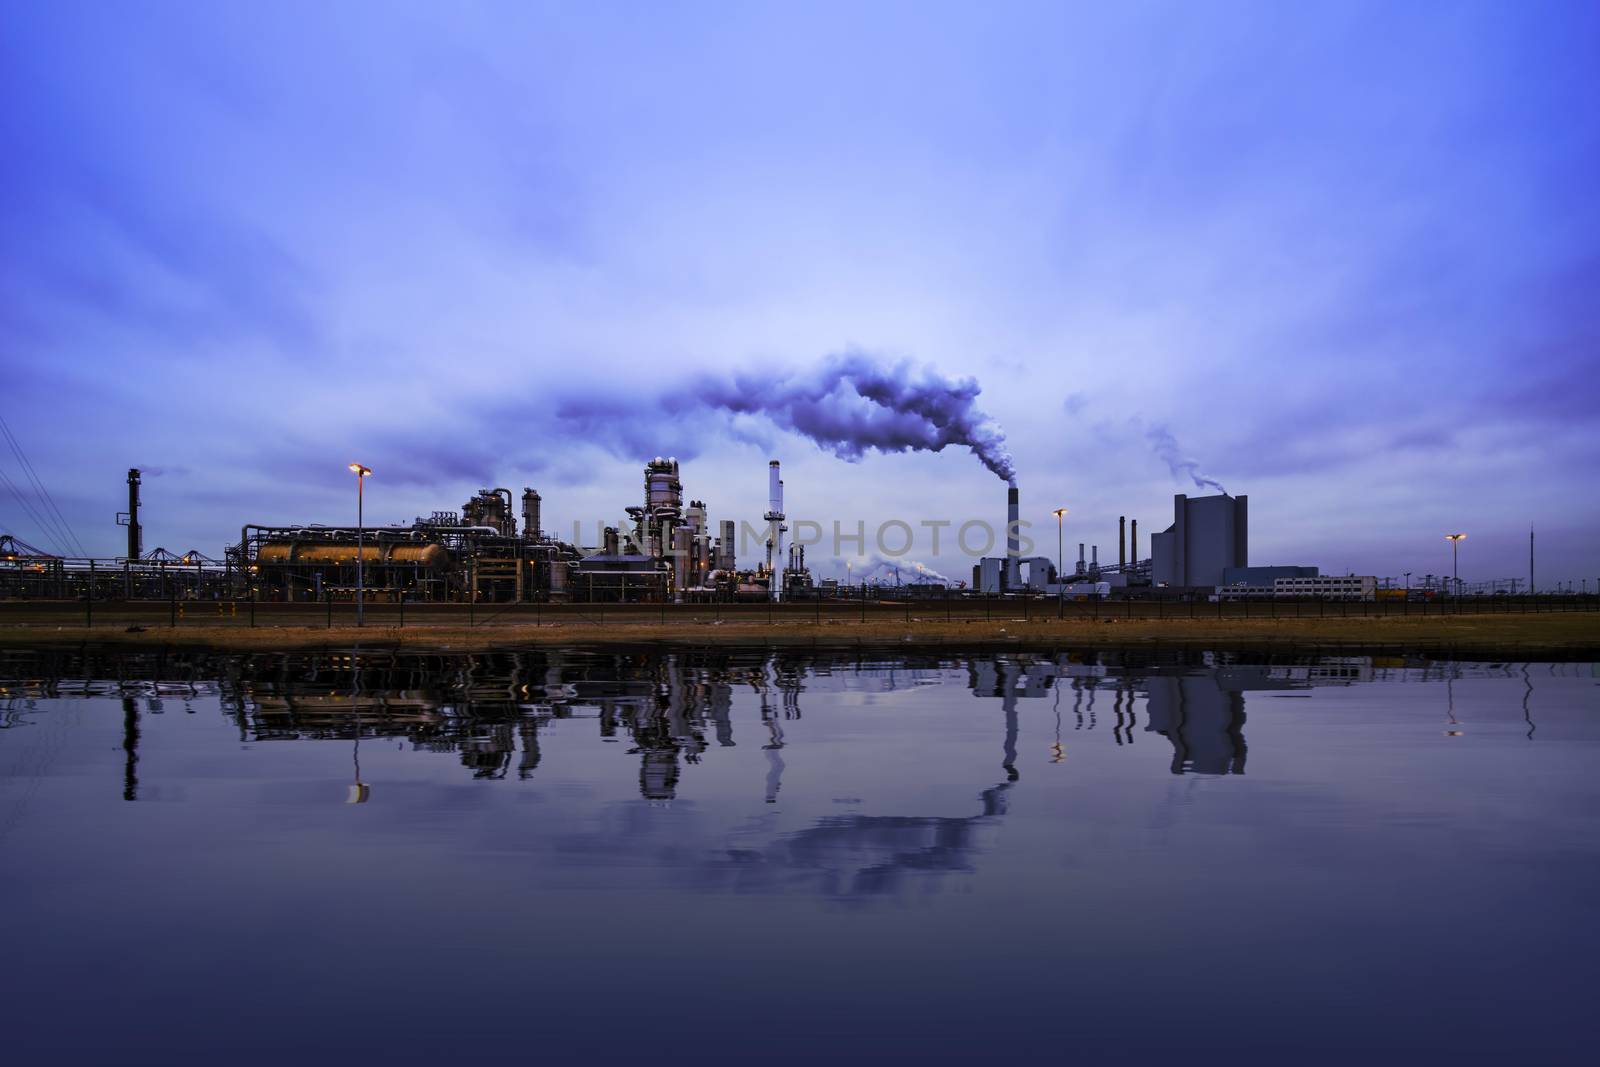 Reflection of refineries and its chimney during the on blue sunset hour moment at Rotterdam, Netherlands by ankorlight